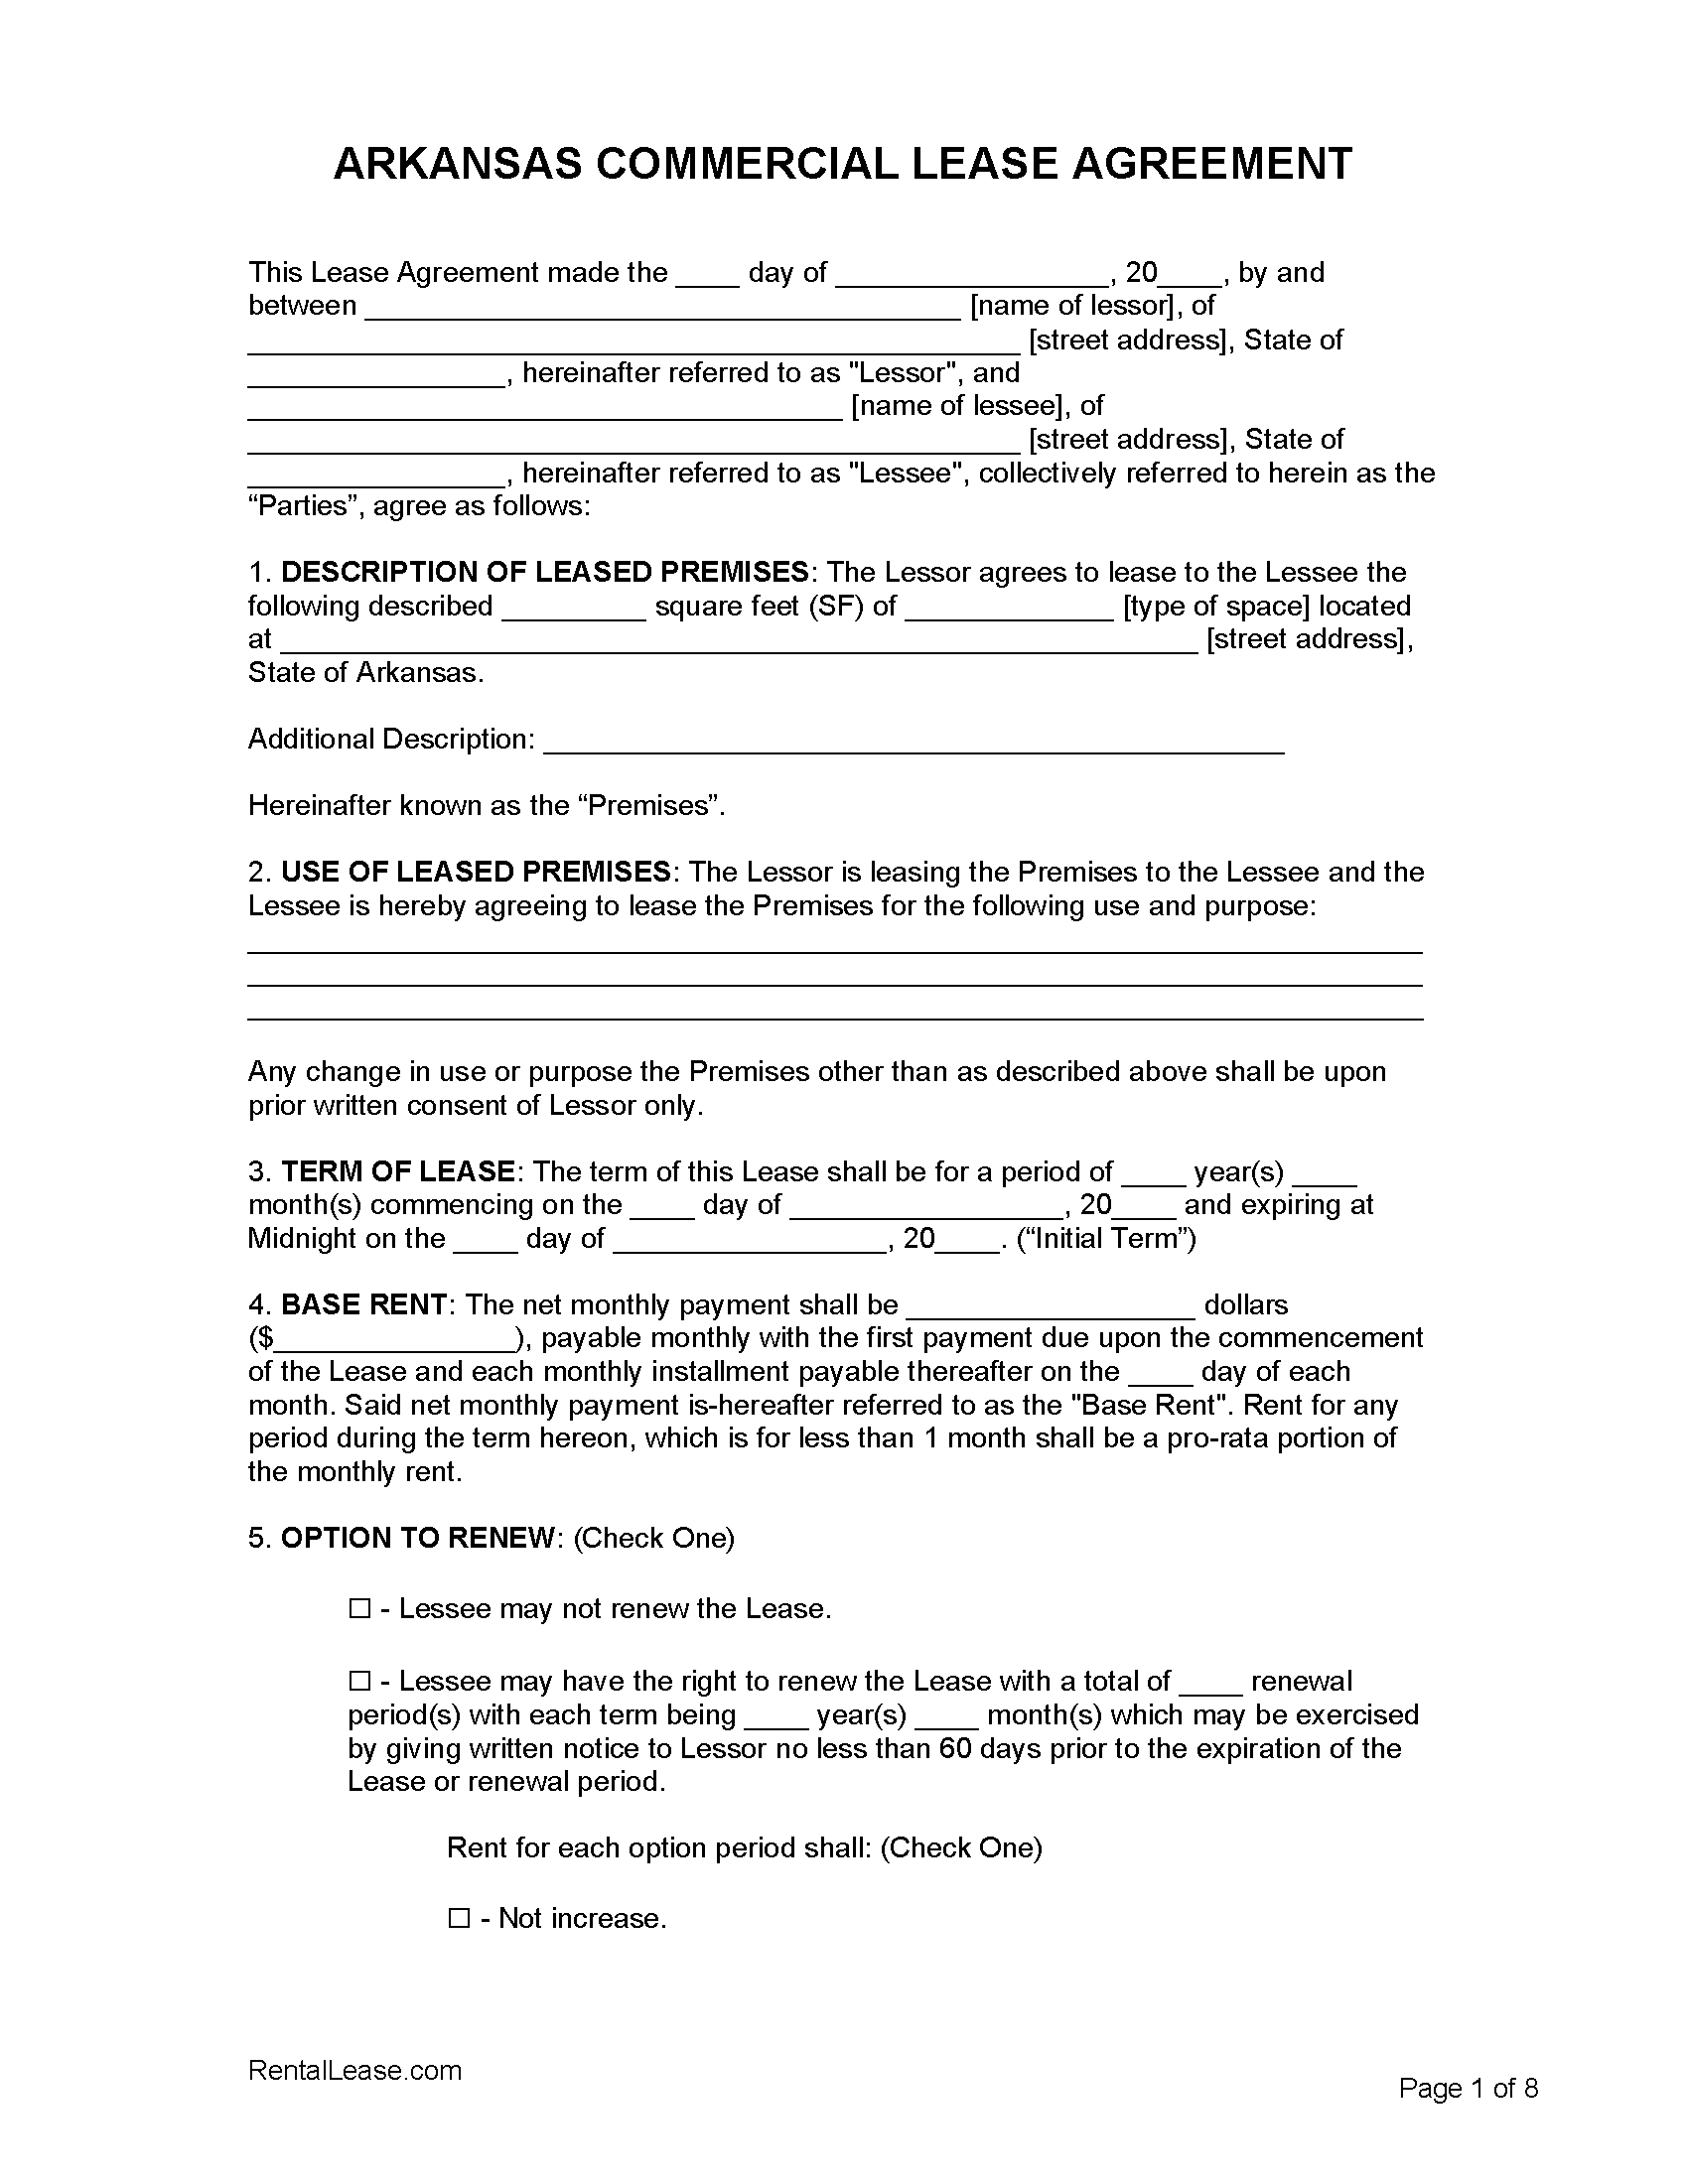 Arkansas Commercial Lease Agreement Template « Rental Lease Agreements